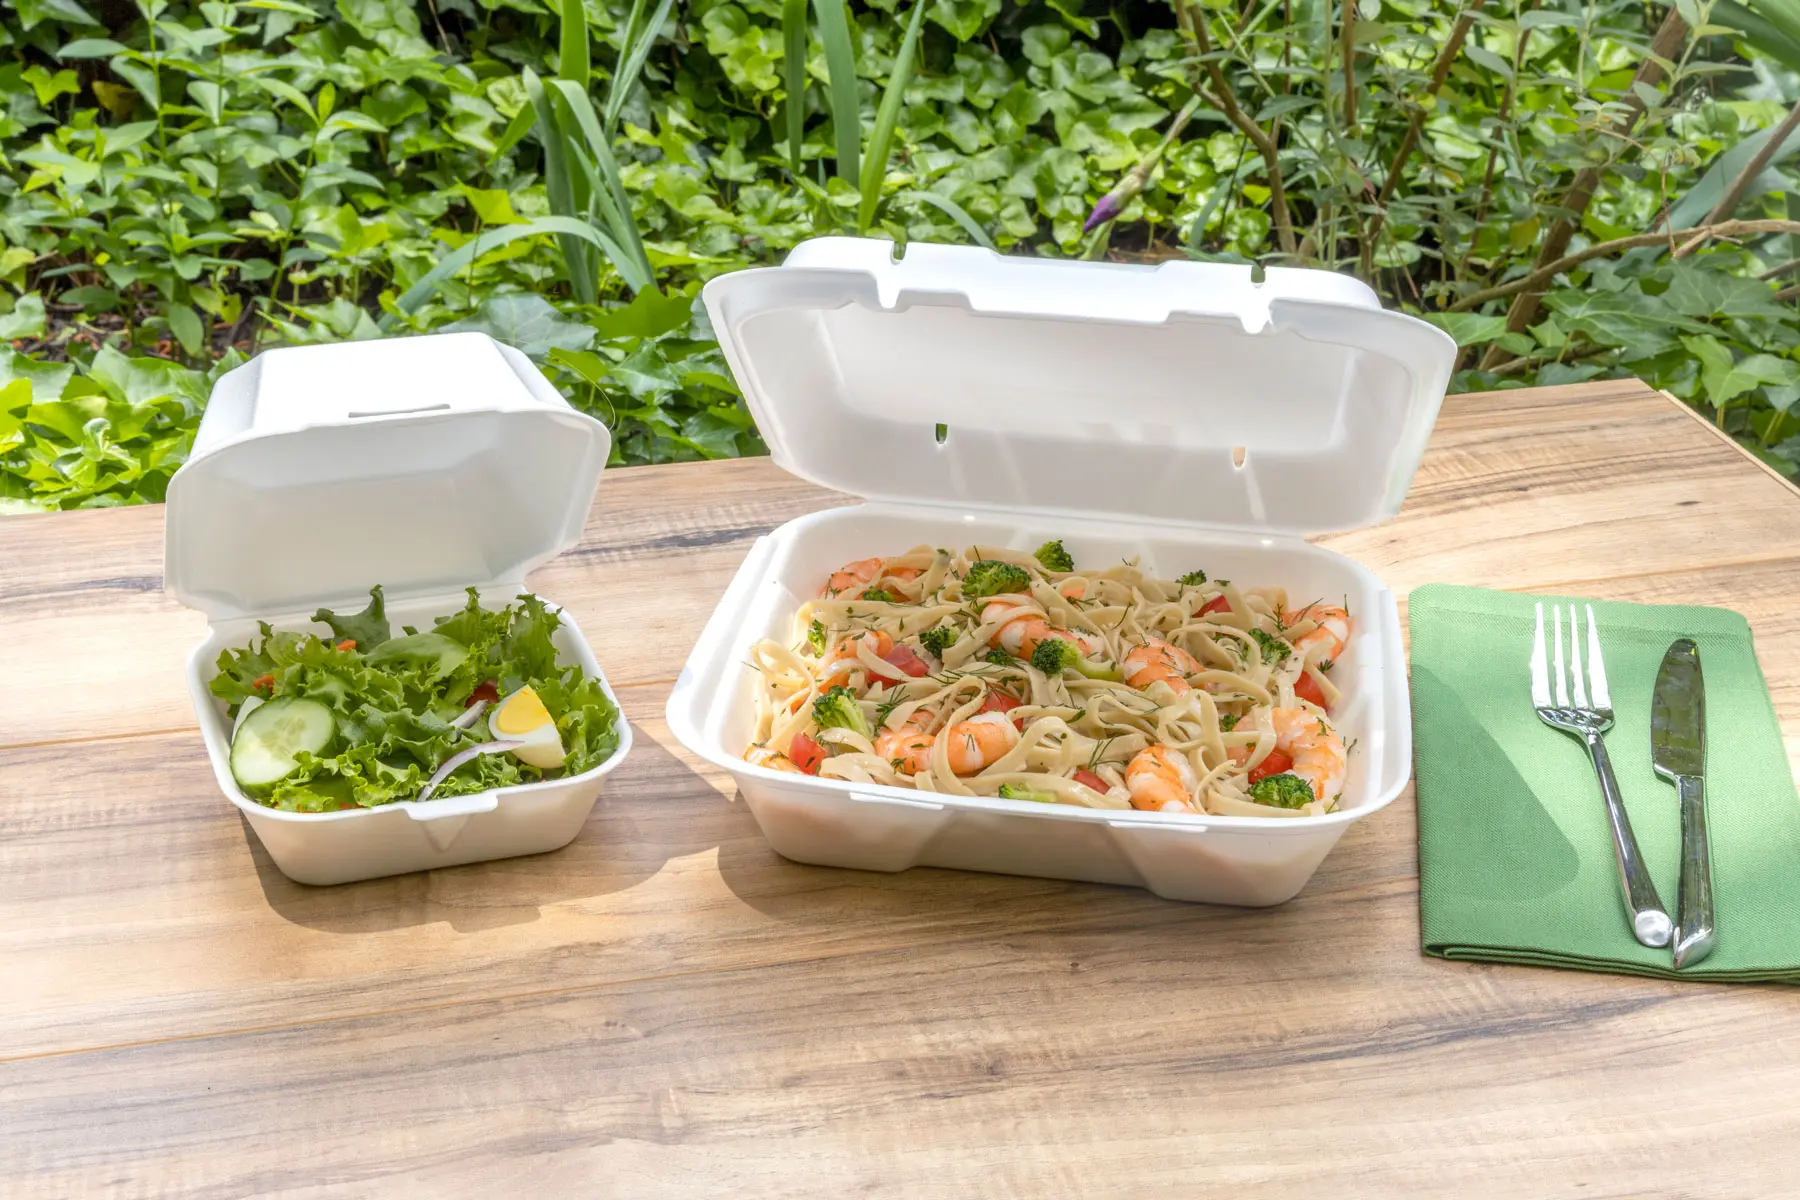 How to Decide Which Foam Alternative Food Packaging Option is Right For You